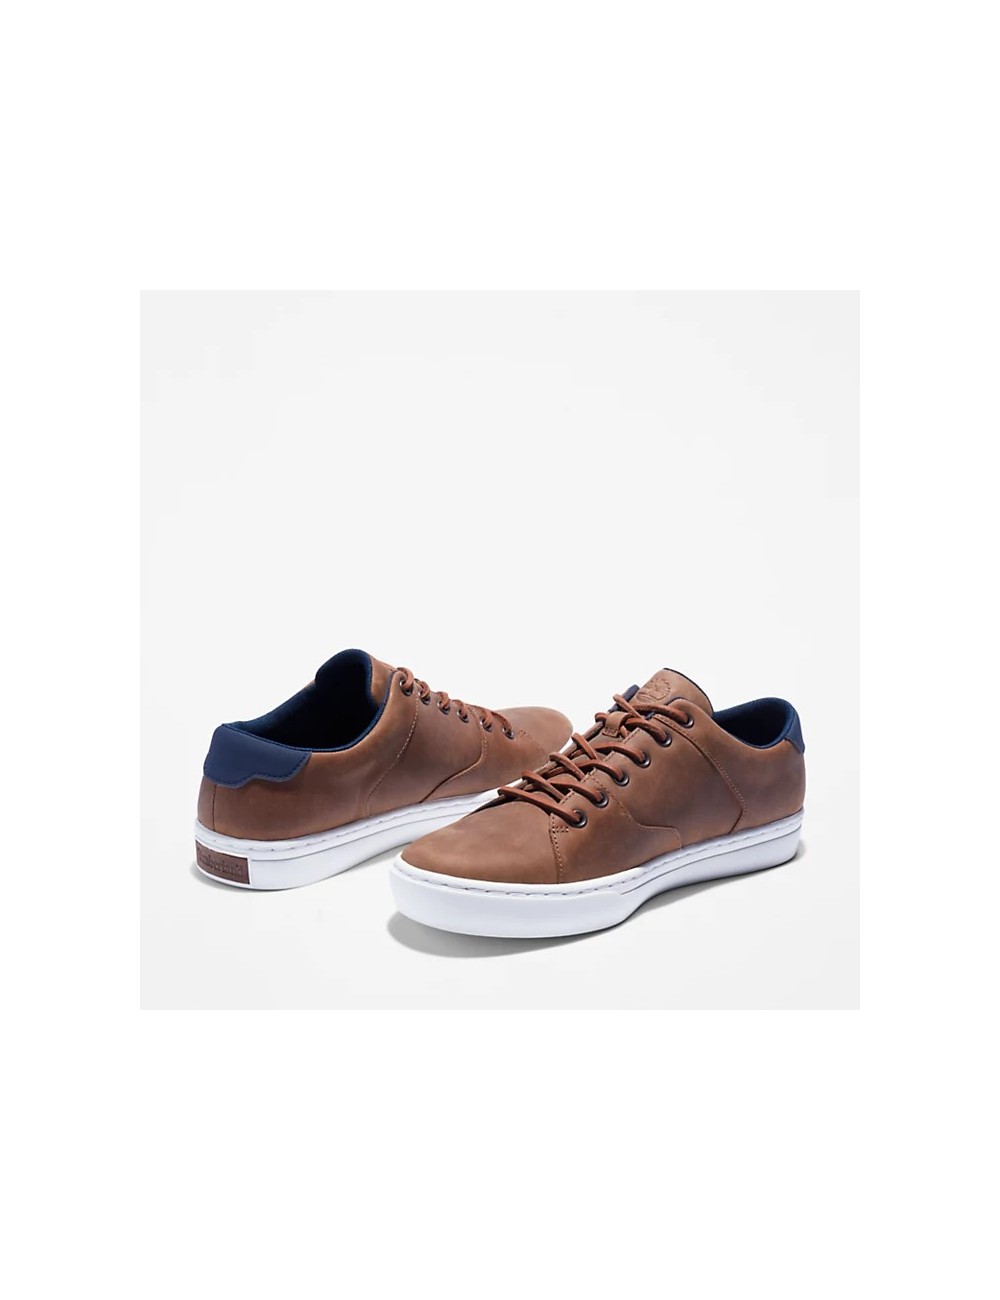 MEN'S SNEAKERS TIMERLAND ADV 2.0 LEATHER